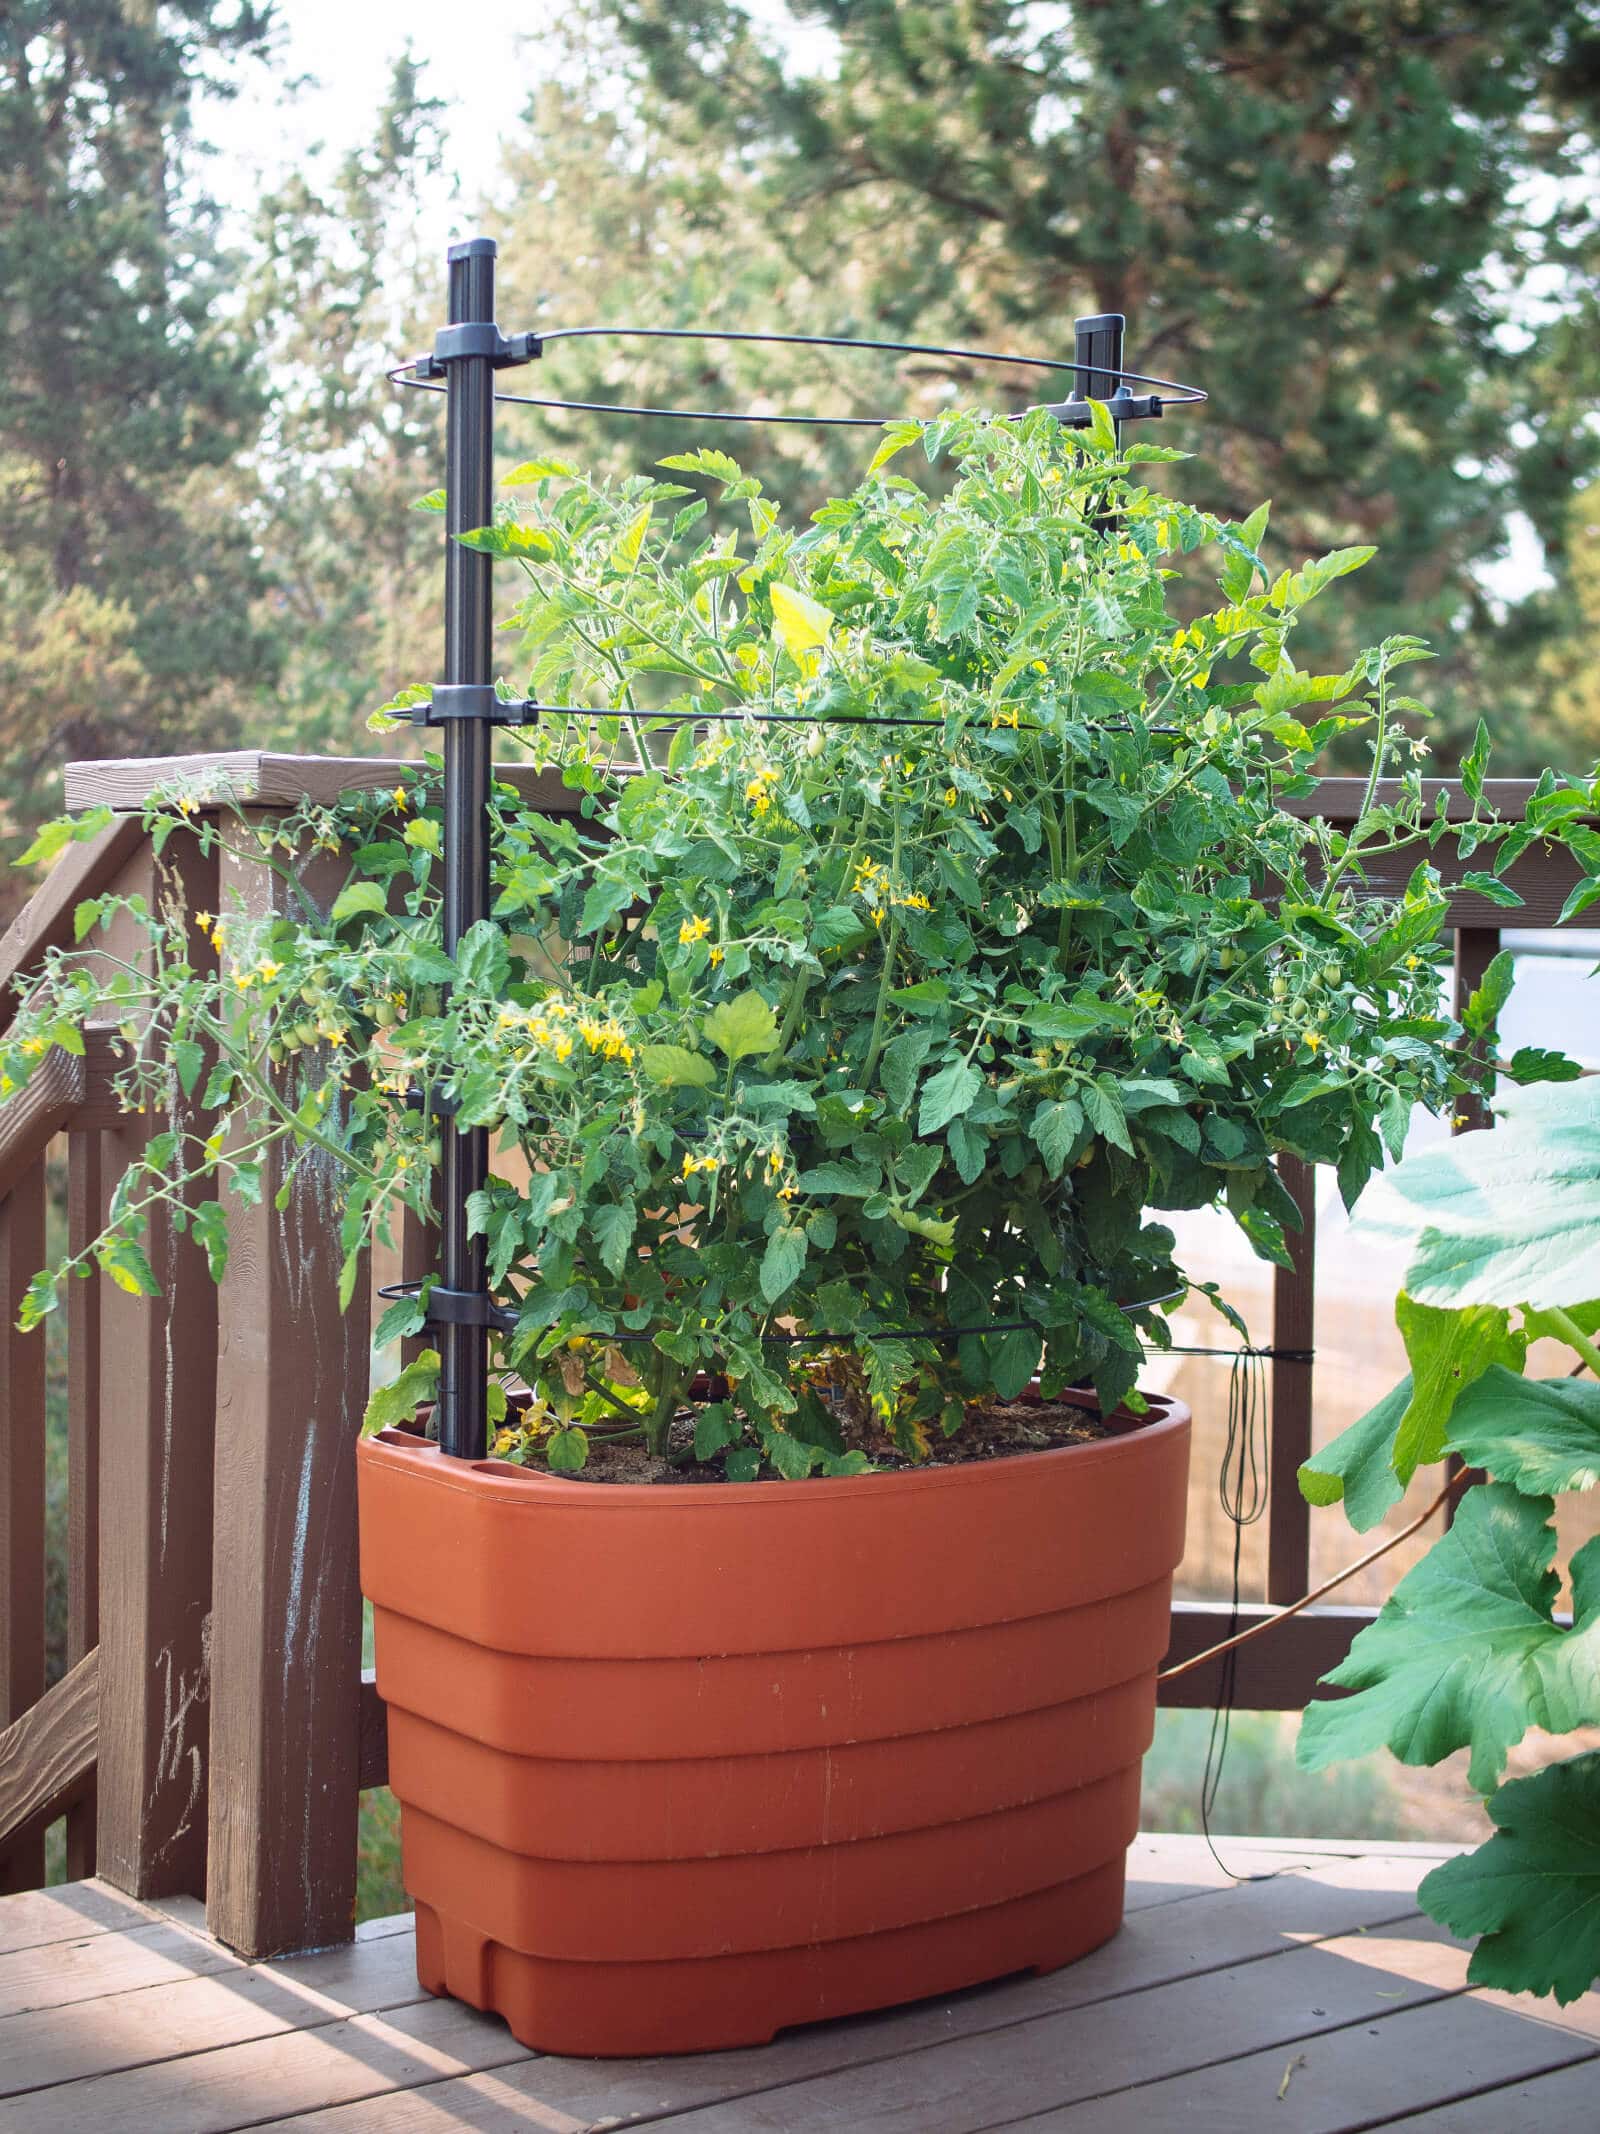 Determinate tomatoes grown in a container